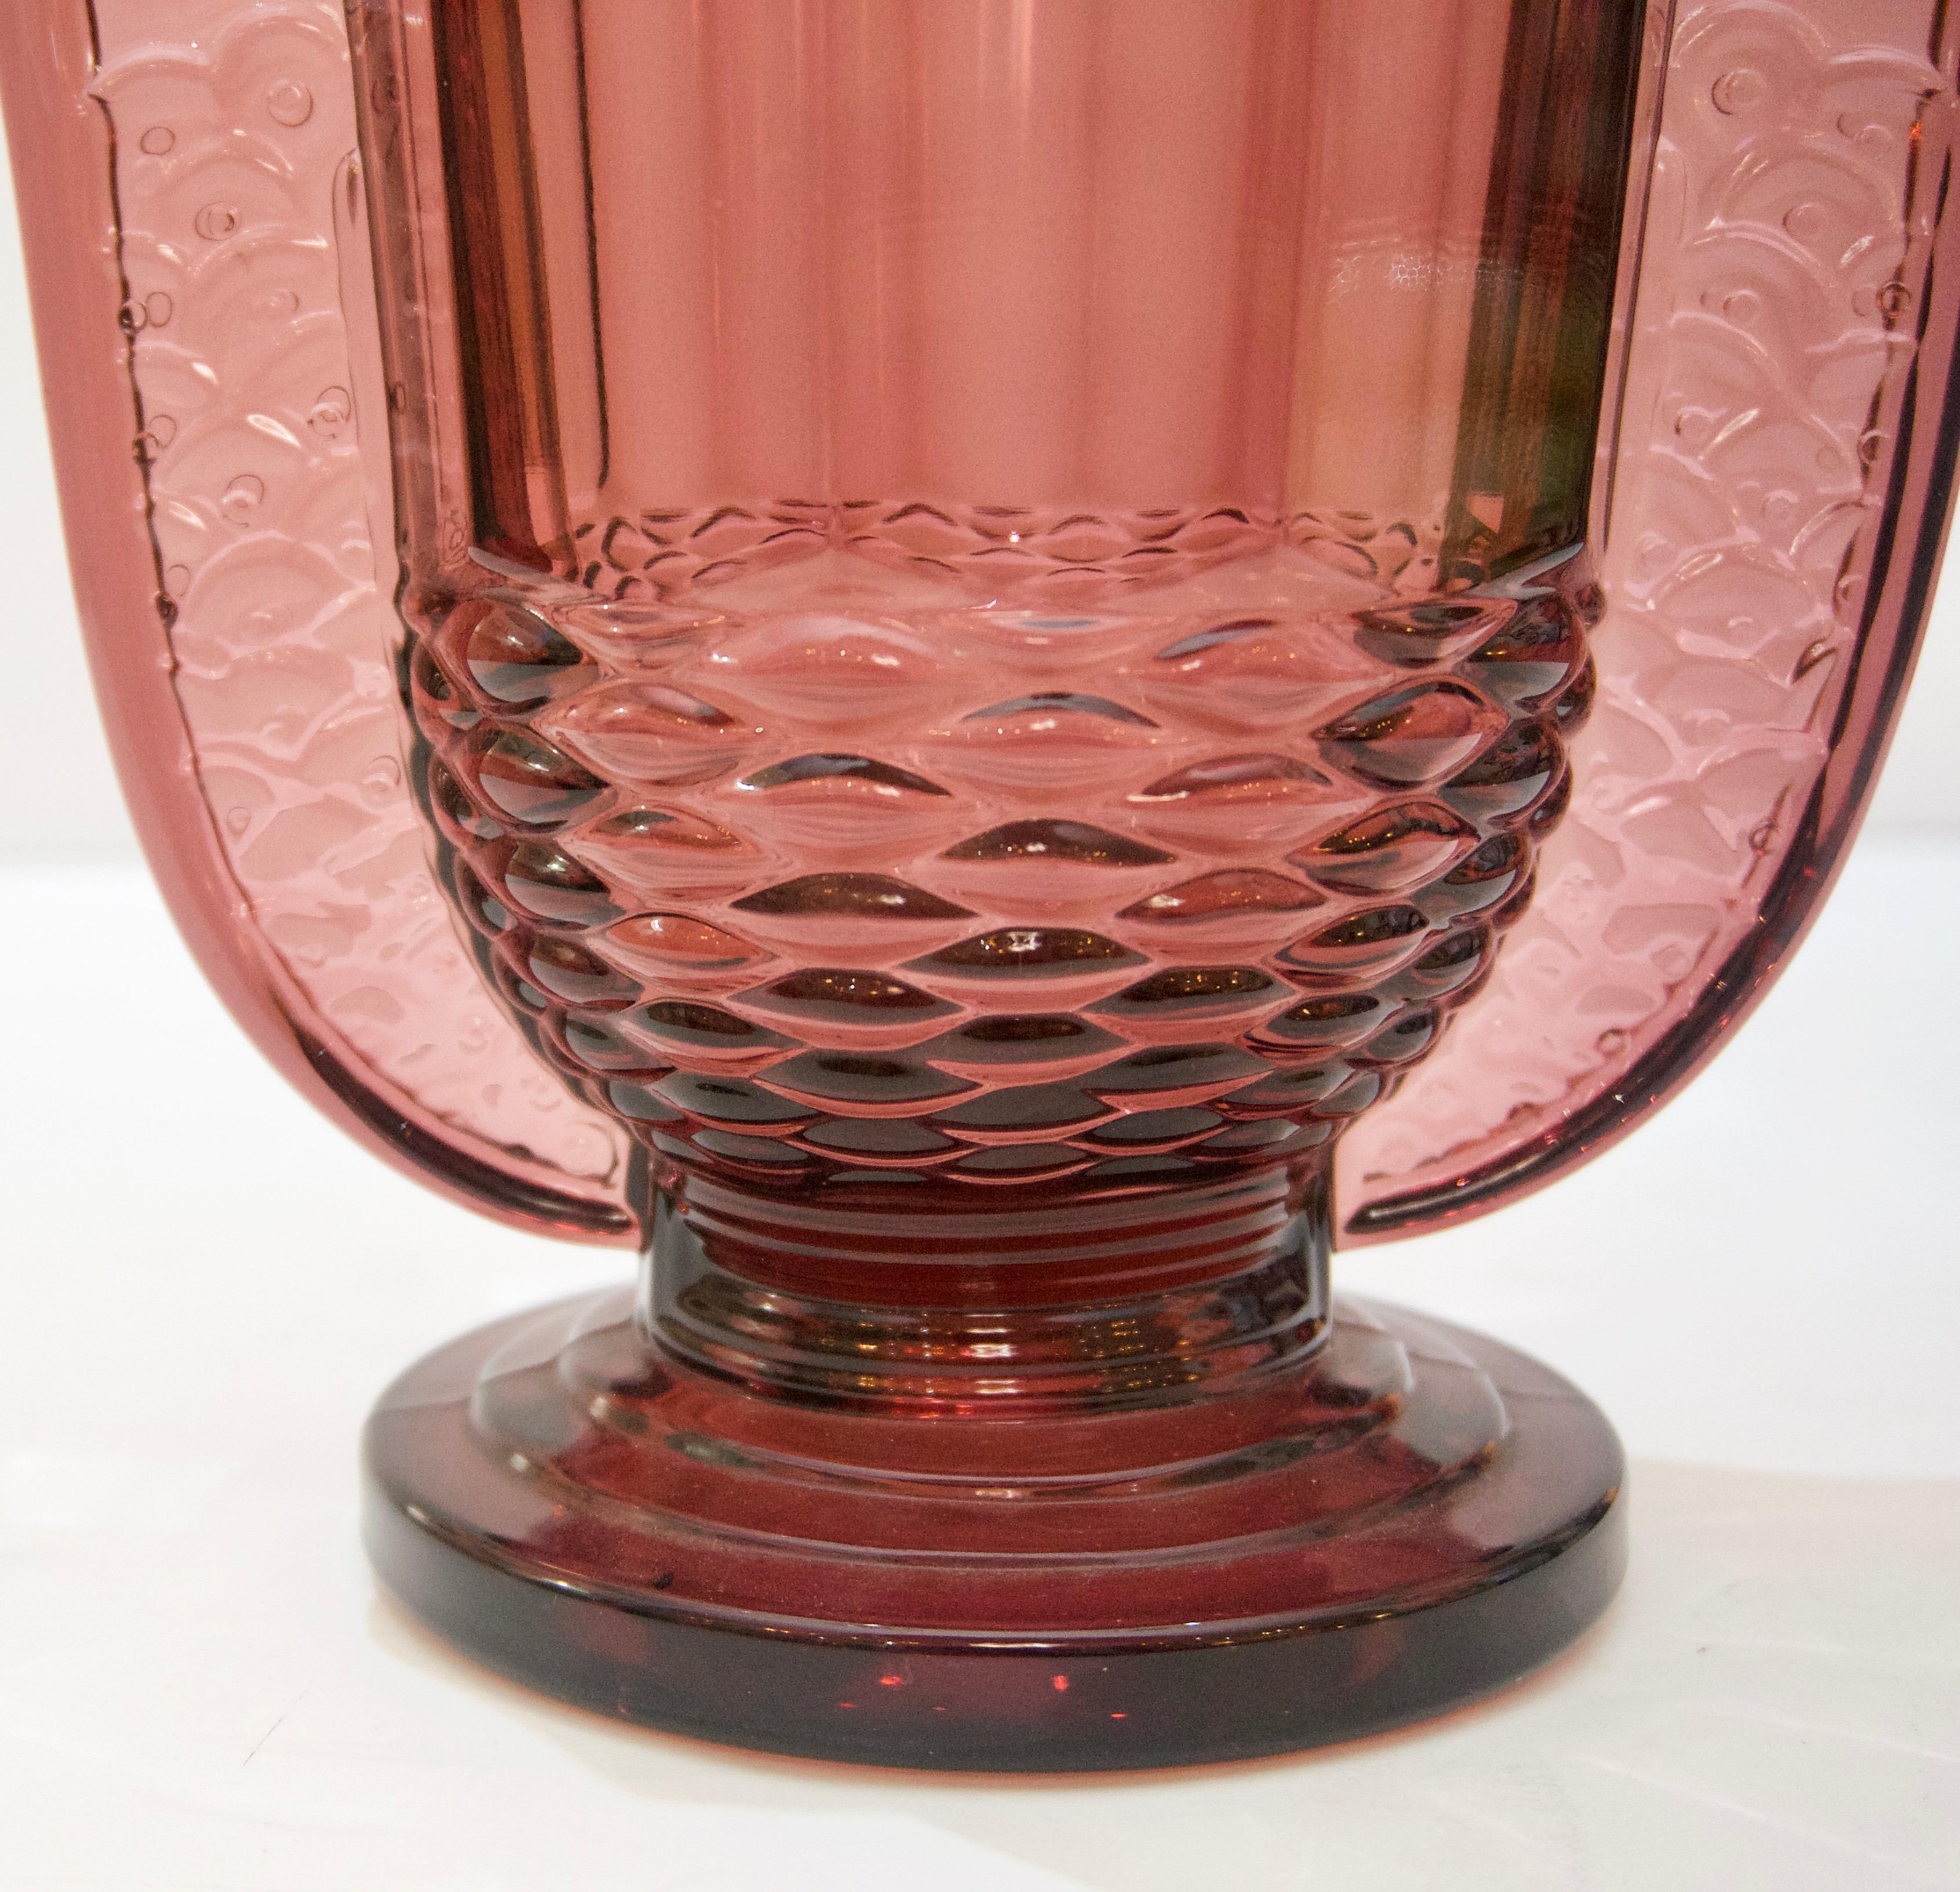 This stylish and chic Val Saint Lambert Art Deco vase dates to the 1920s-1930s and the pattern is known as 